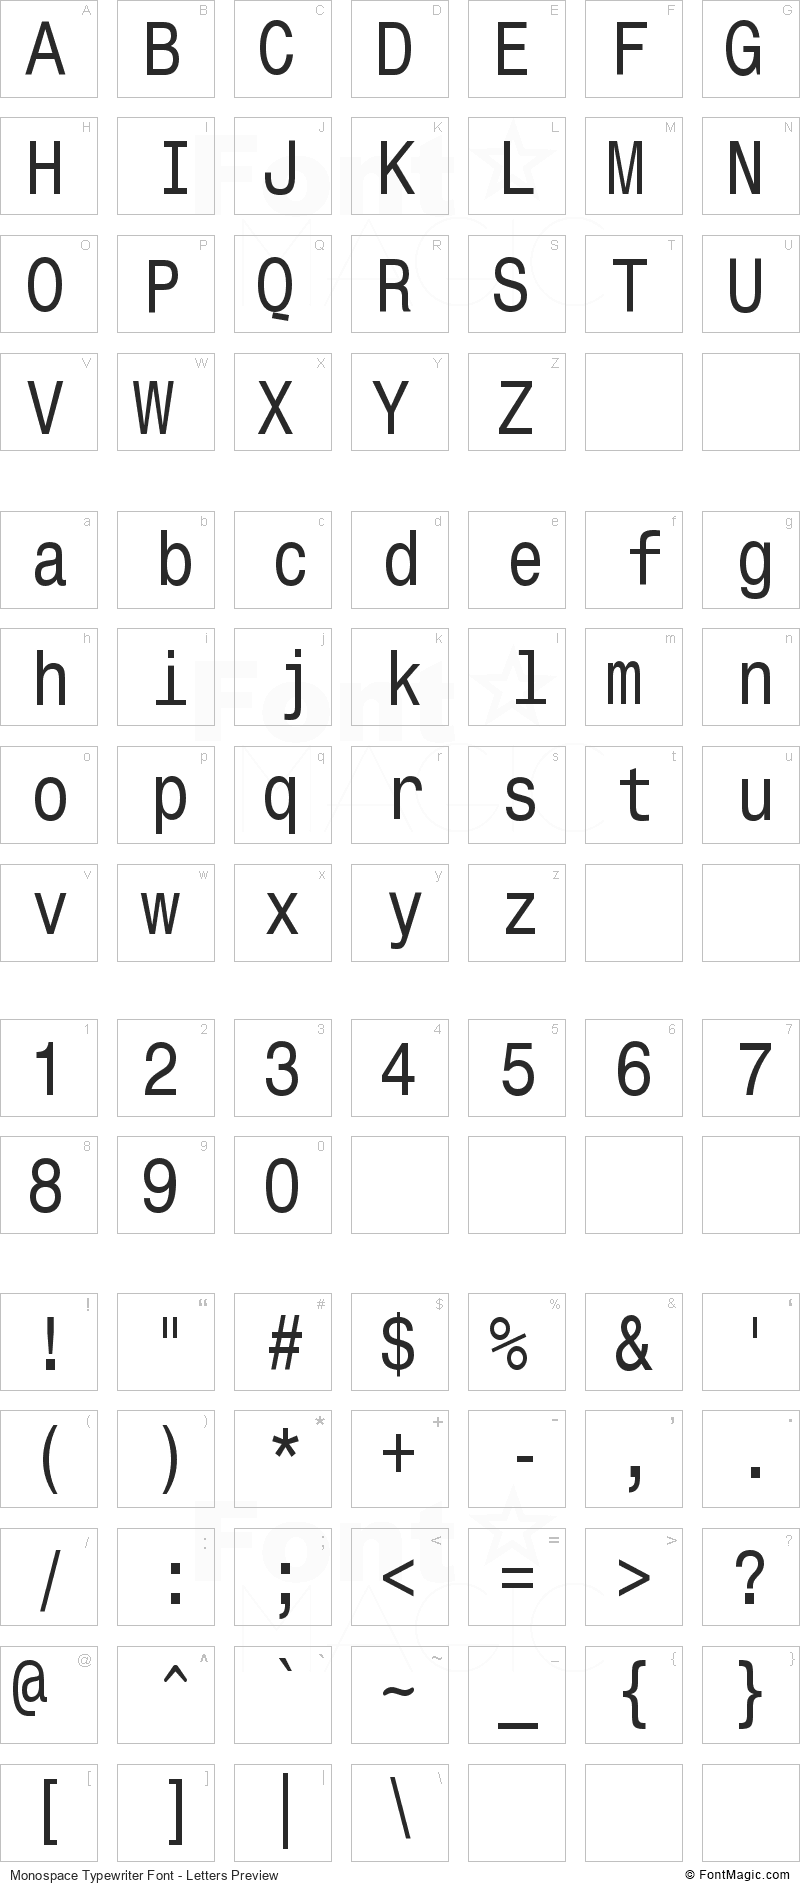 Monospace Typewriter Font - All Latters Preview Chart